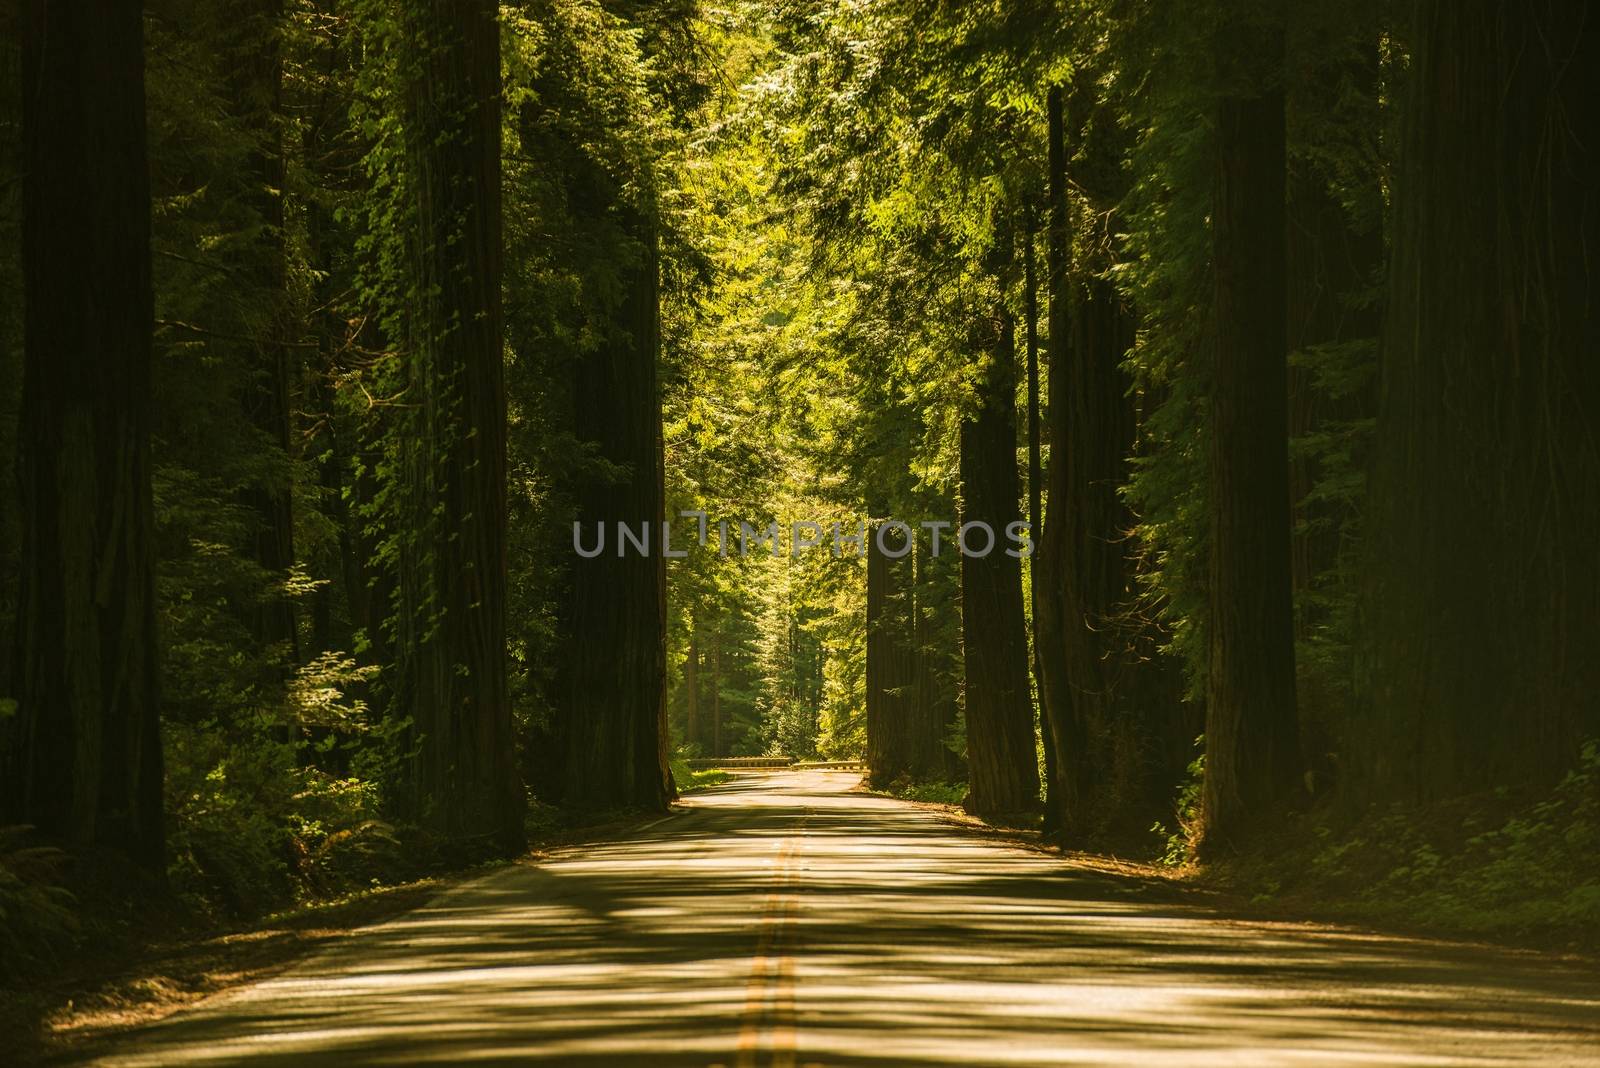 Giant Redwood Trees Road. Redwood Highway in California, United States.